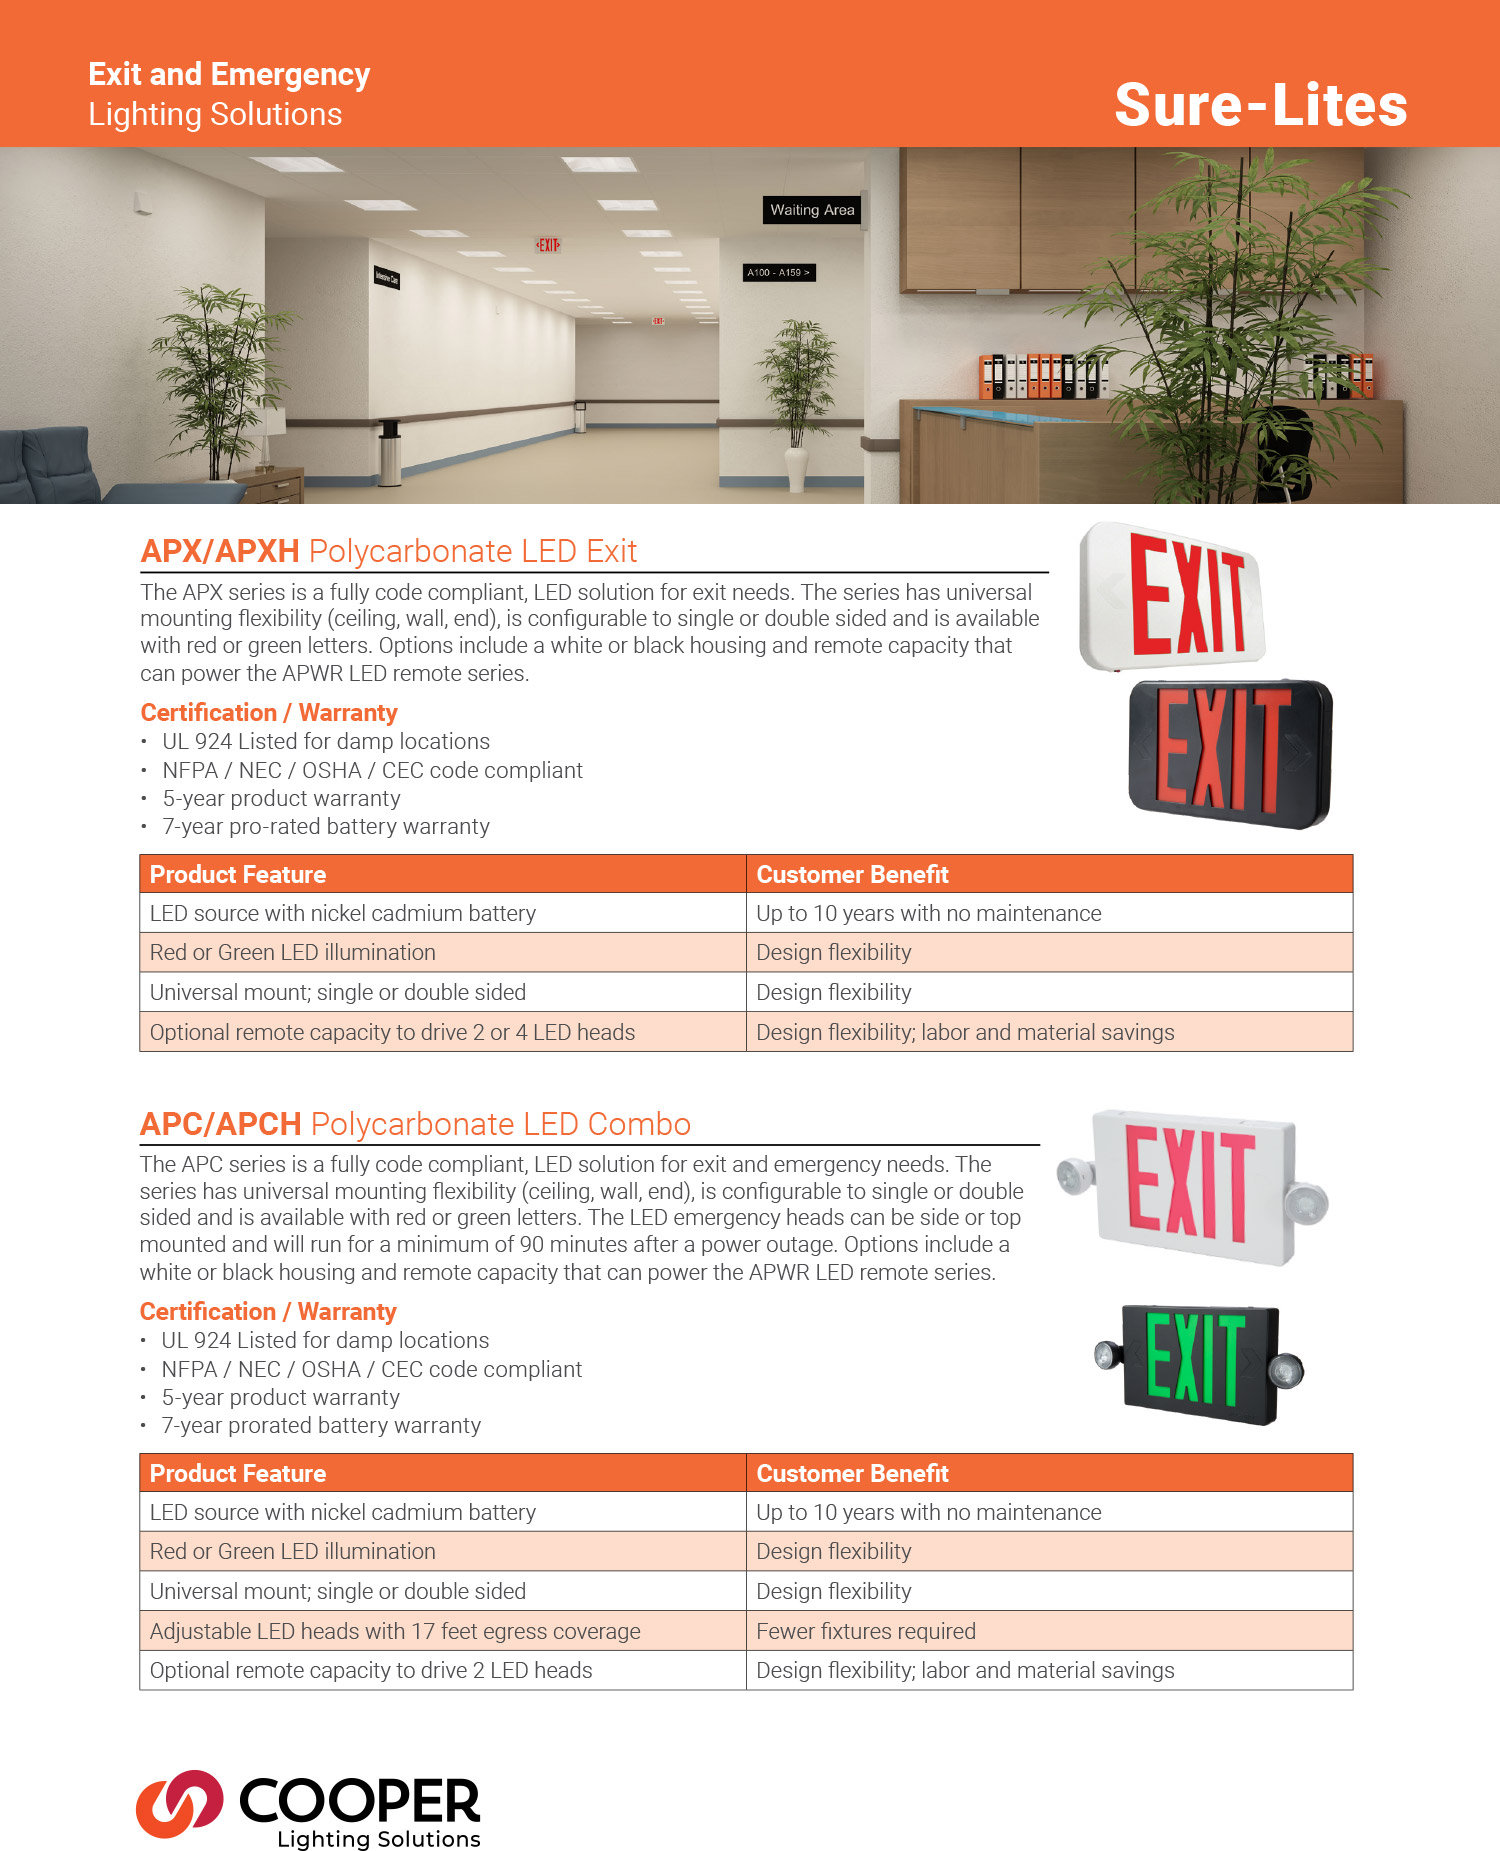 Cooper Lighting Solutions exit and emergency light solutions